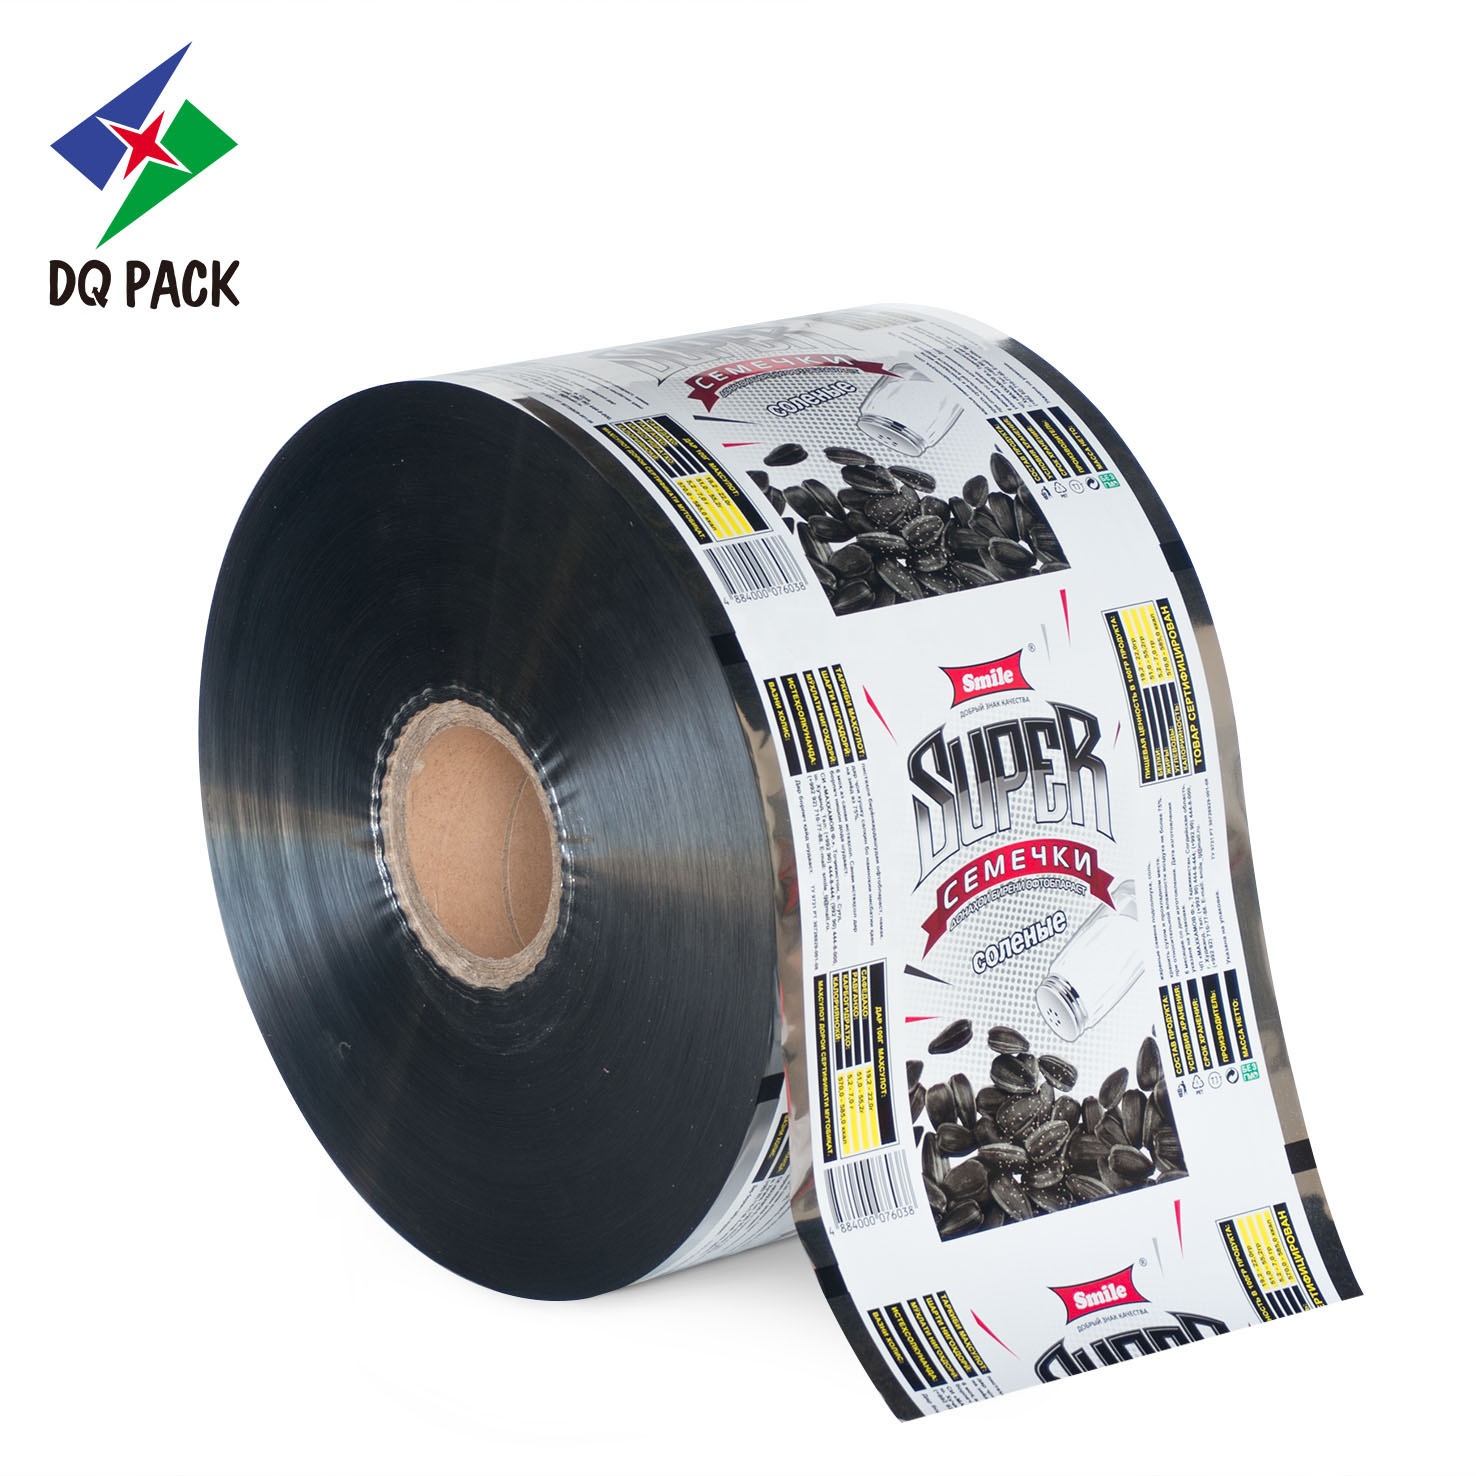 DQ PACK Hot Sale Custom Printed BOPP Roll Stock Film Metallized Film For seeds snack chips chocolate packaging